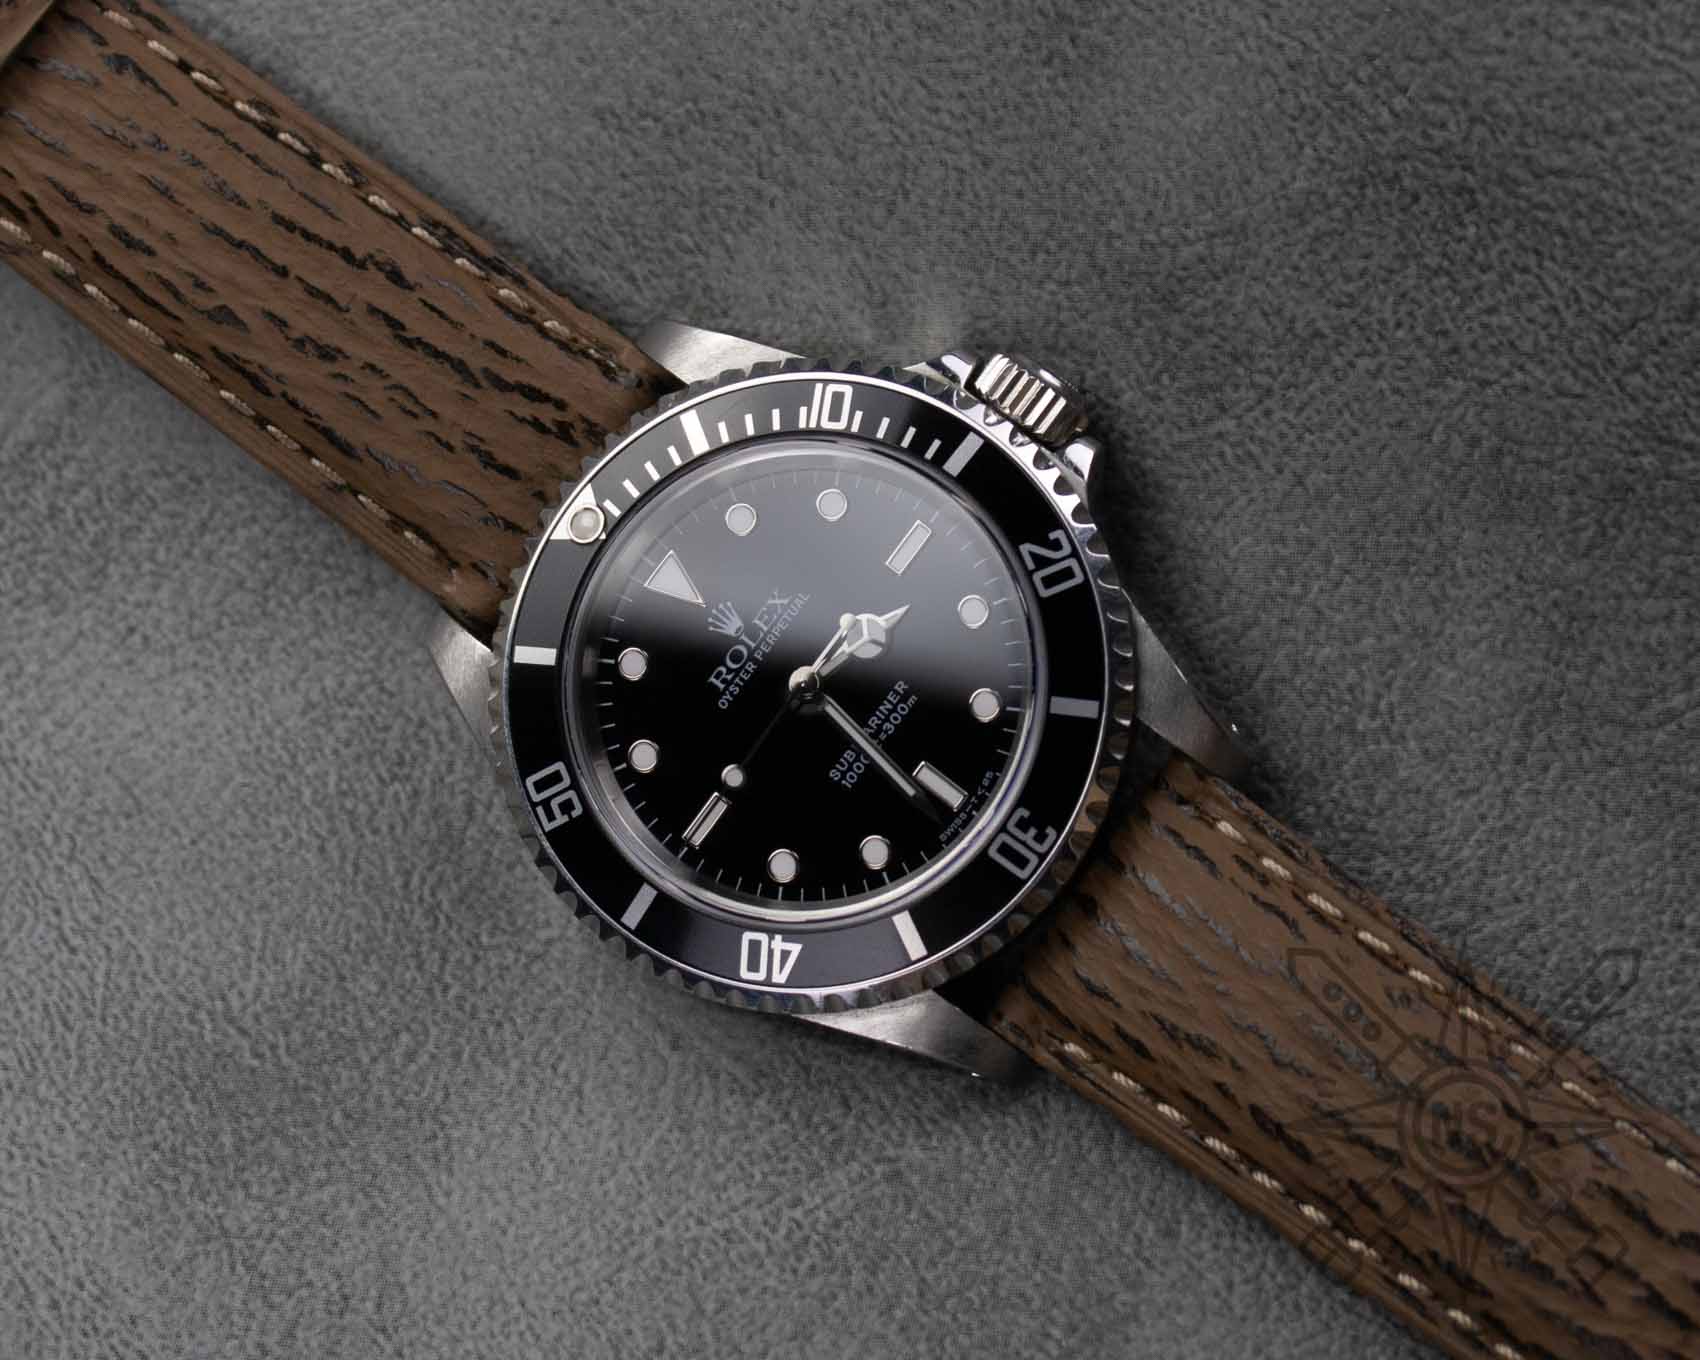 Rolex Submariner on a brown shark watch band